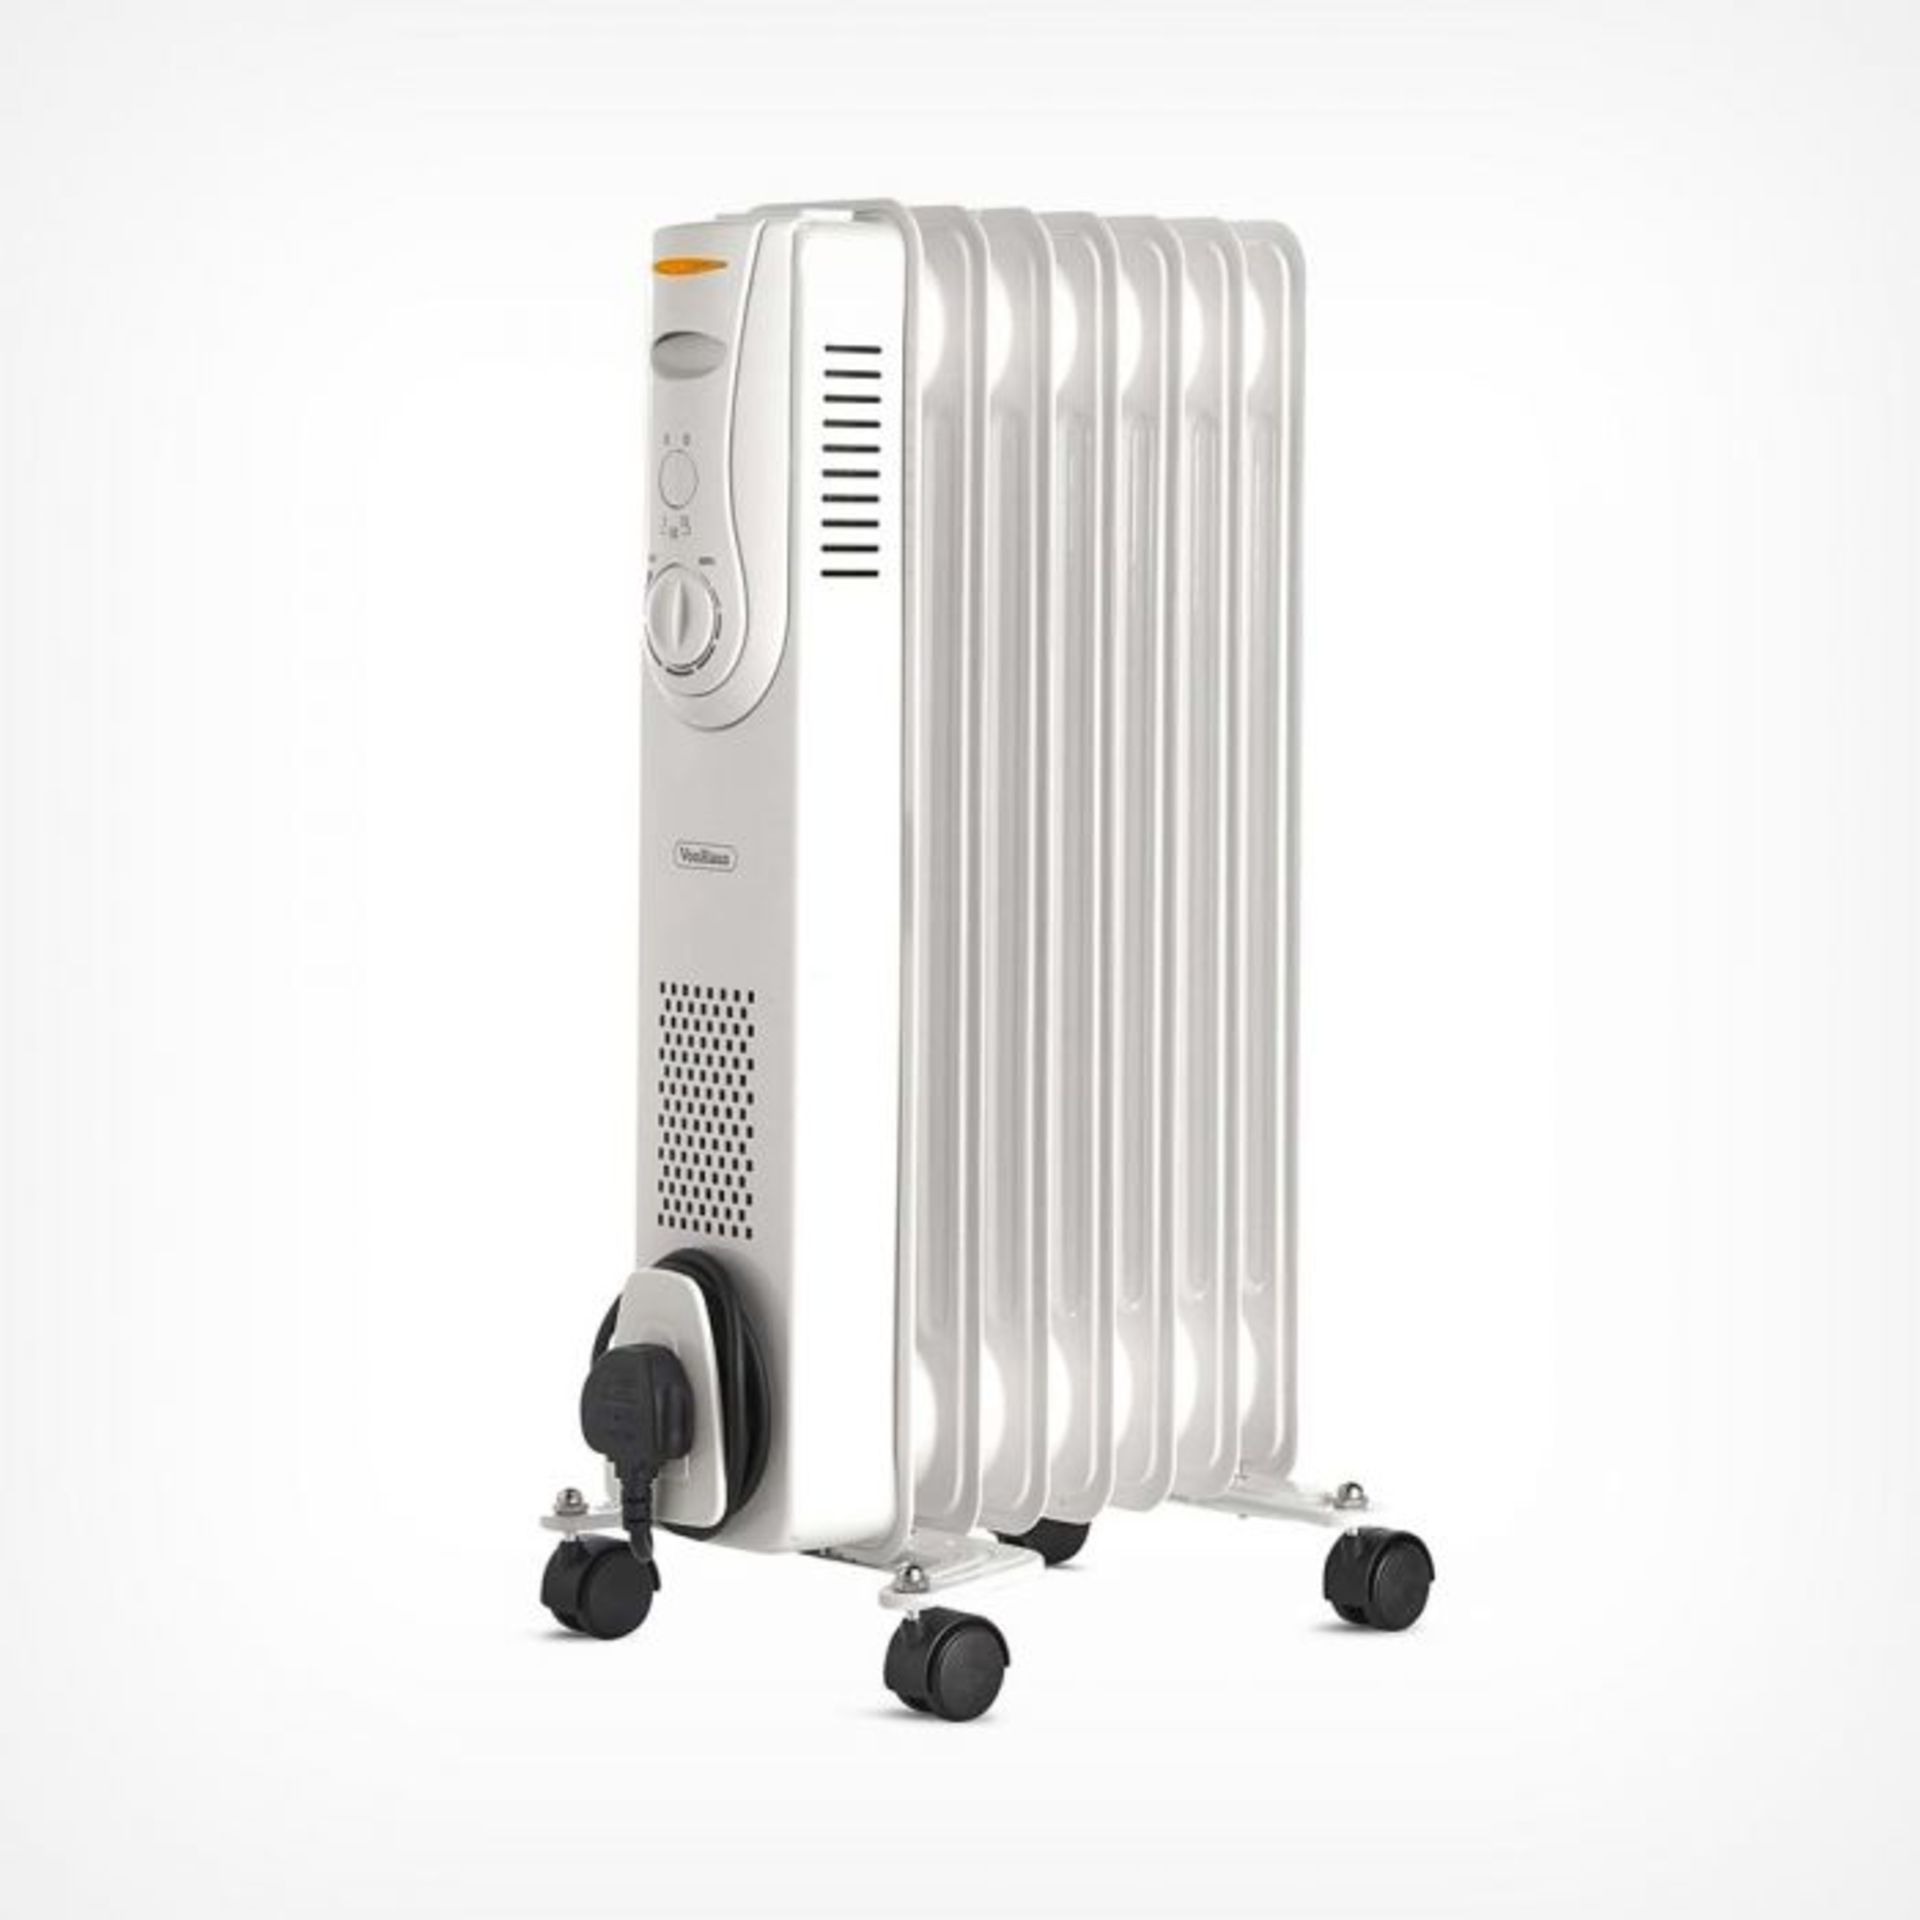 (V112)7 Fin 1500W Oil Filled Radiator - White Powerful 1500W radiator with 7 oil-filled fins ?... - Image 2 of 4